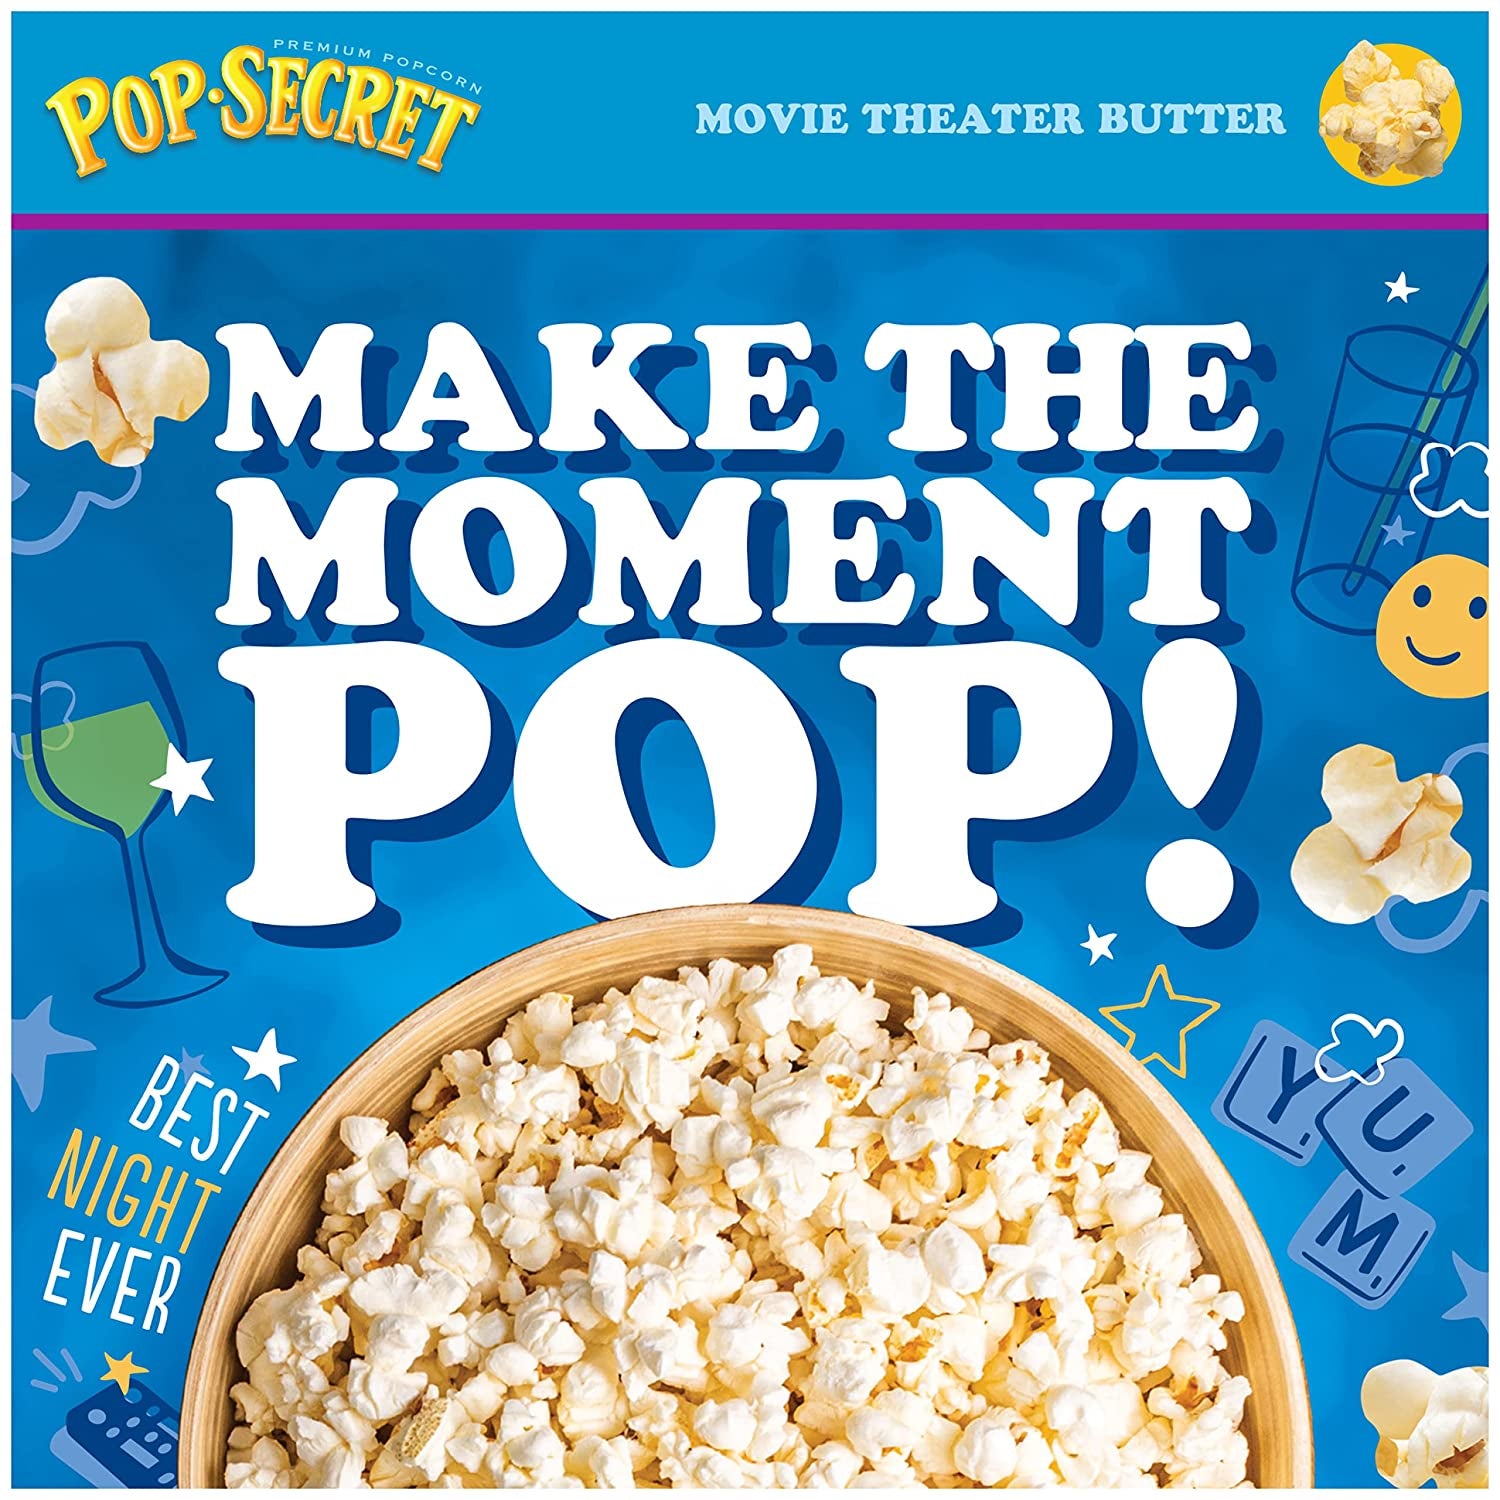 Pop Secret Microwave Popcorn, Movie Theater Butter Flavor, 1.75 Oz Snack Bags, (Pack of 12)